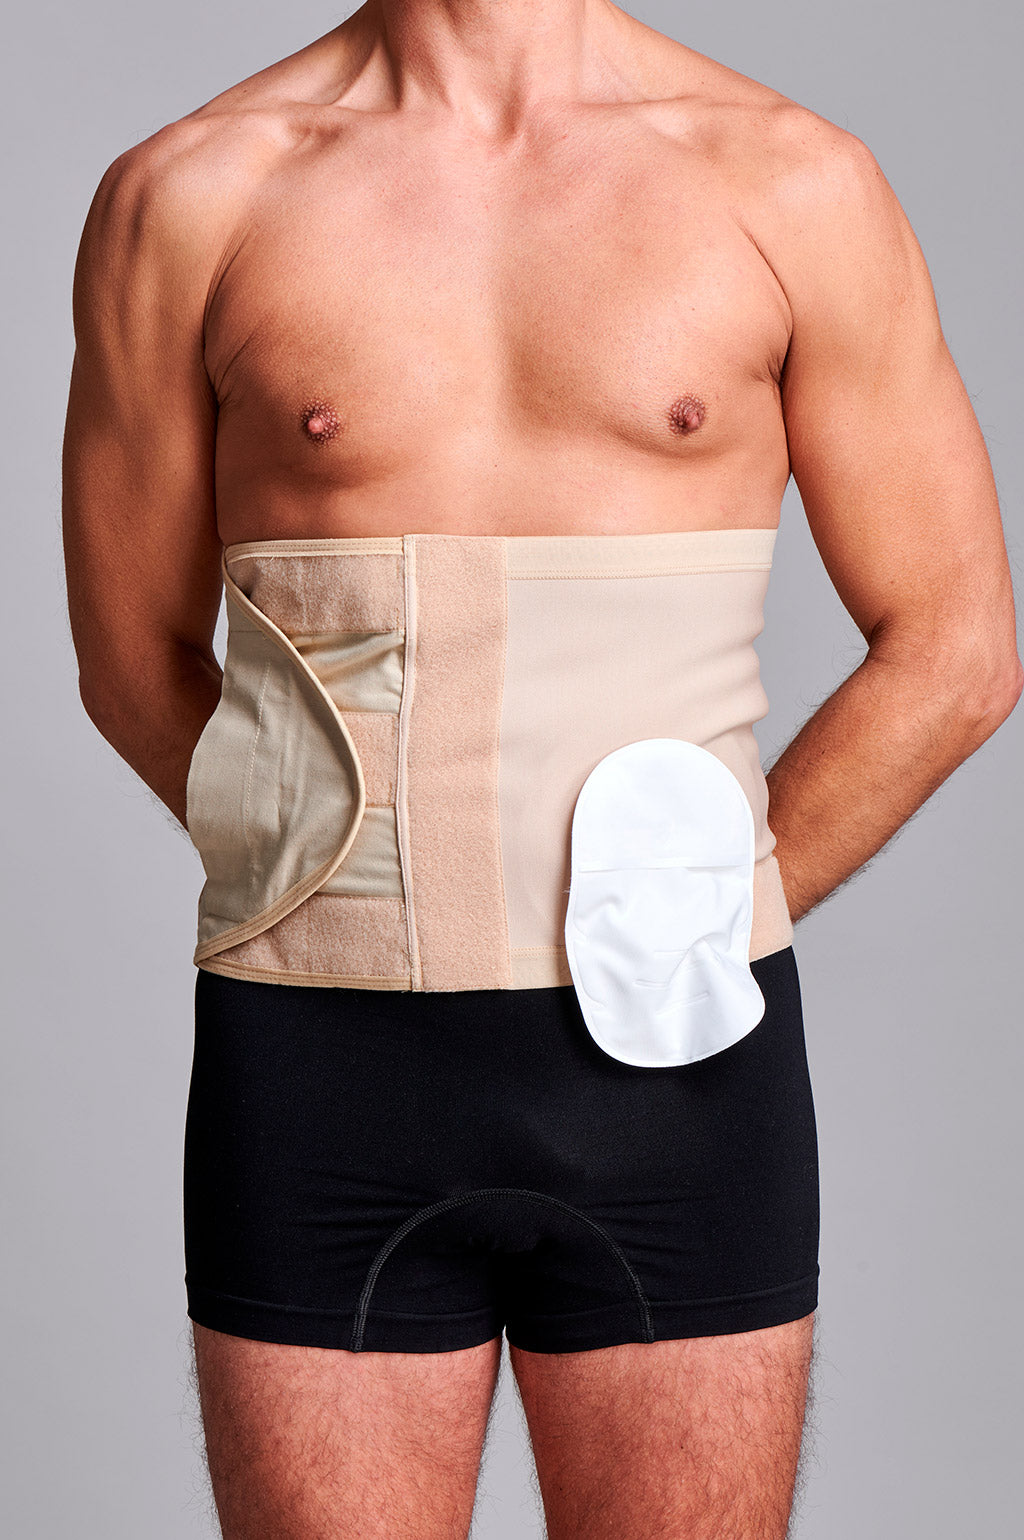 CUI Hernia Support Belt, Anti-Roll (Unisex) - Nightingale Medical Supplies